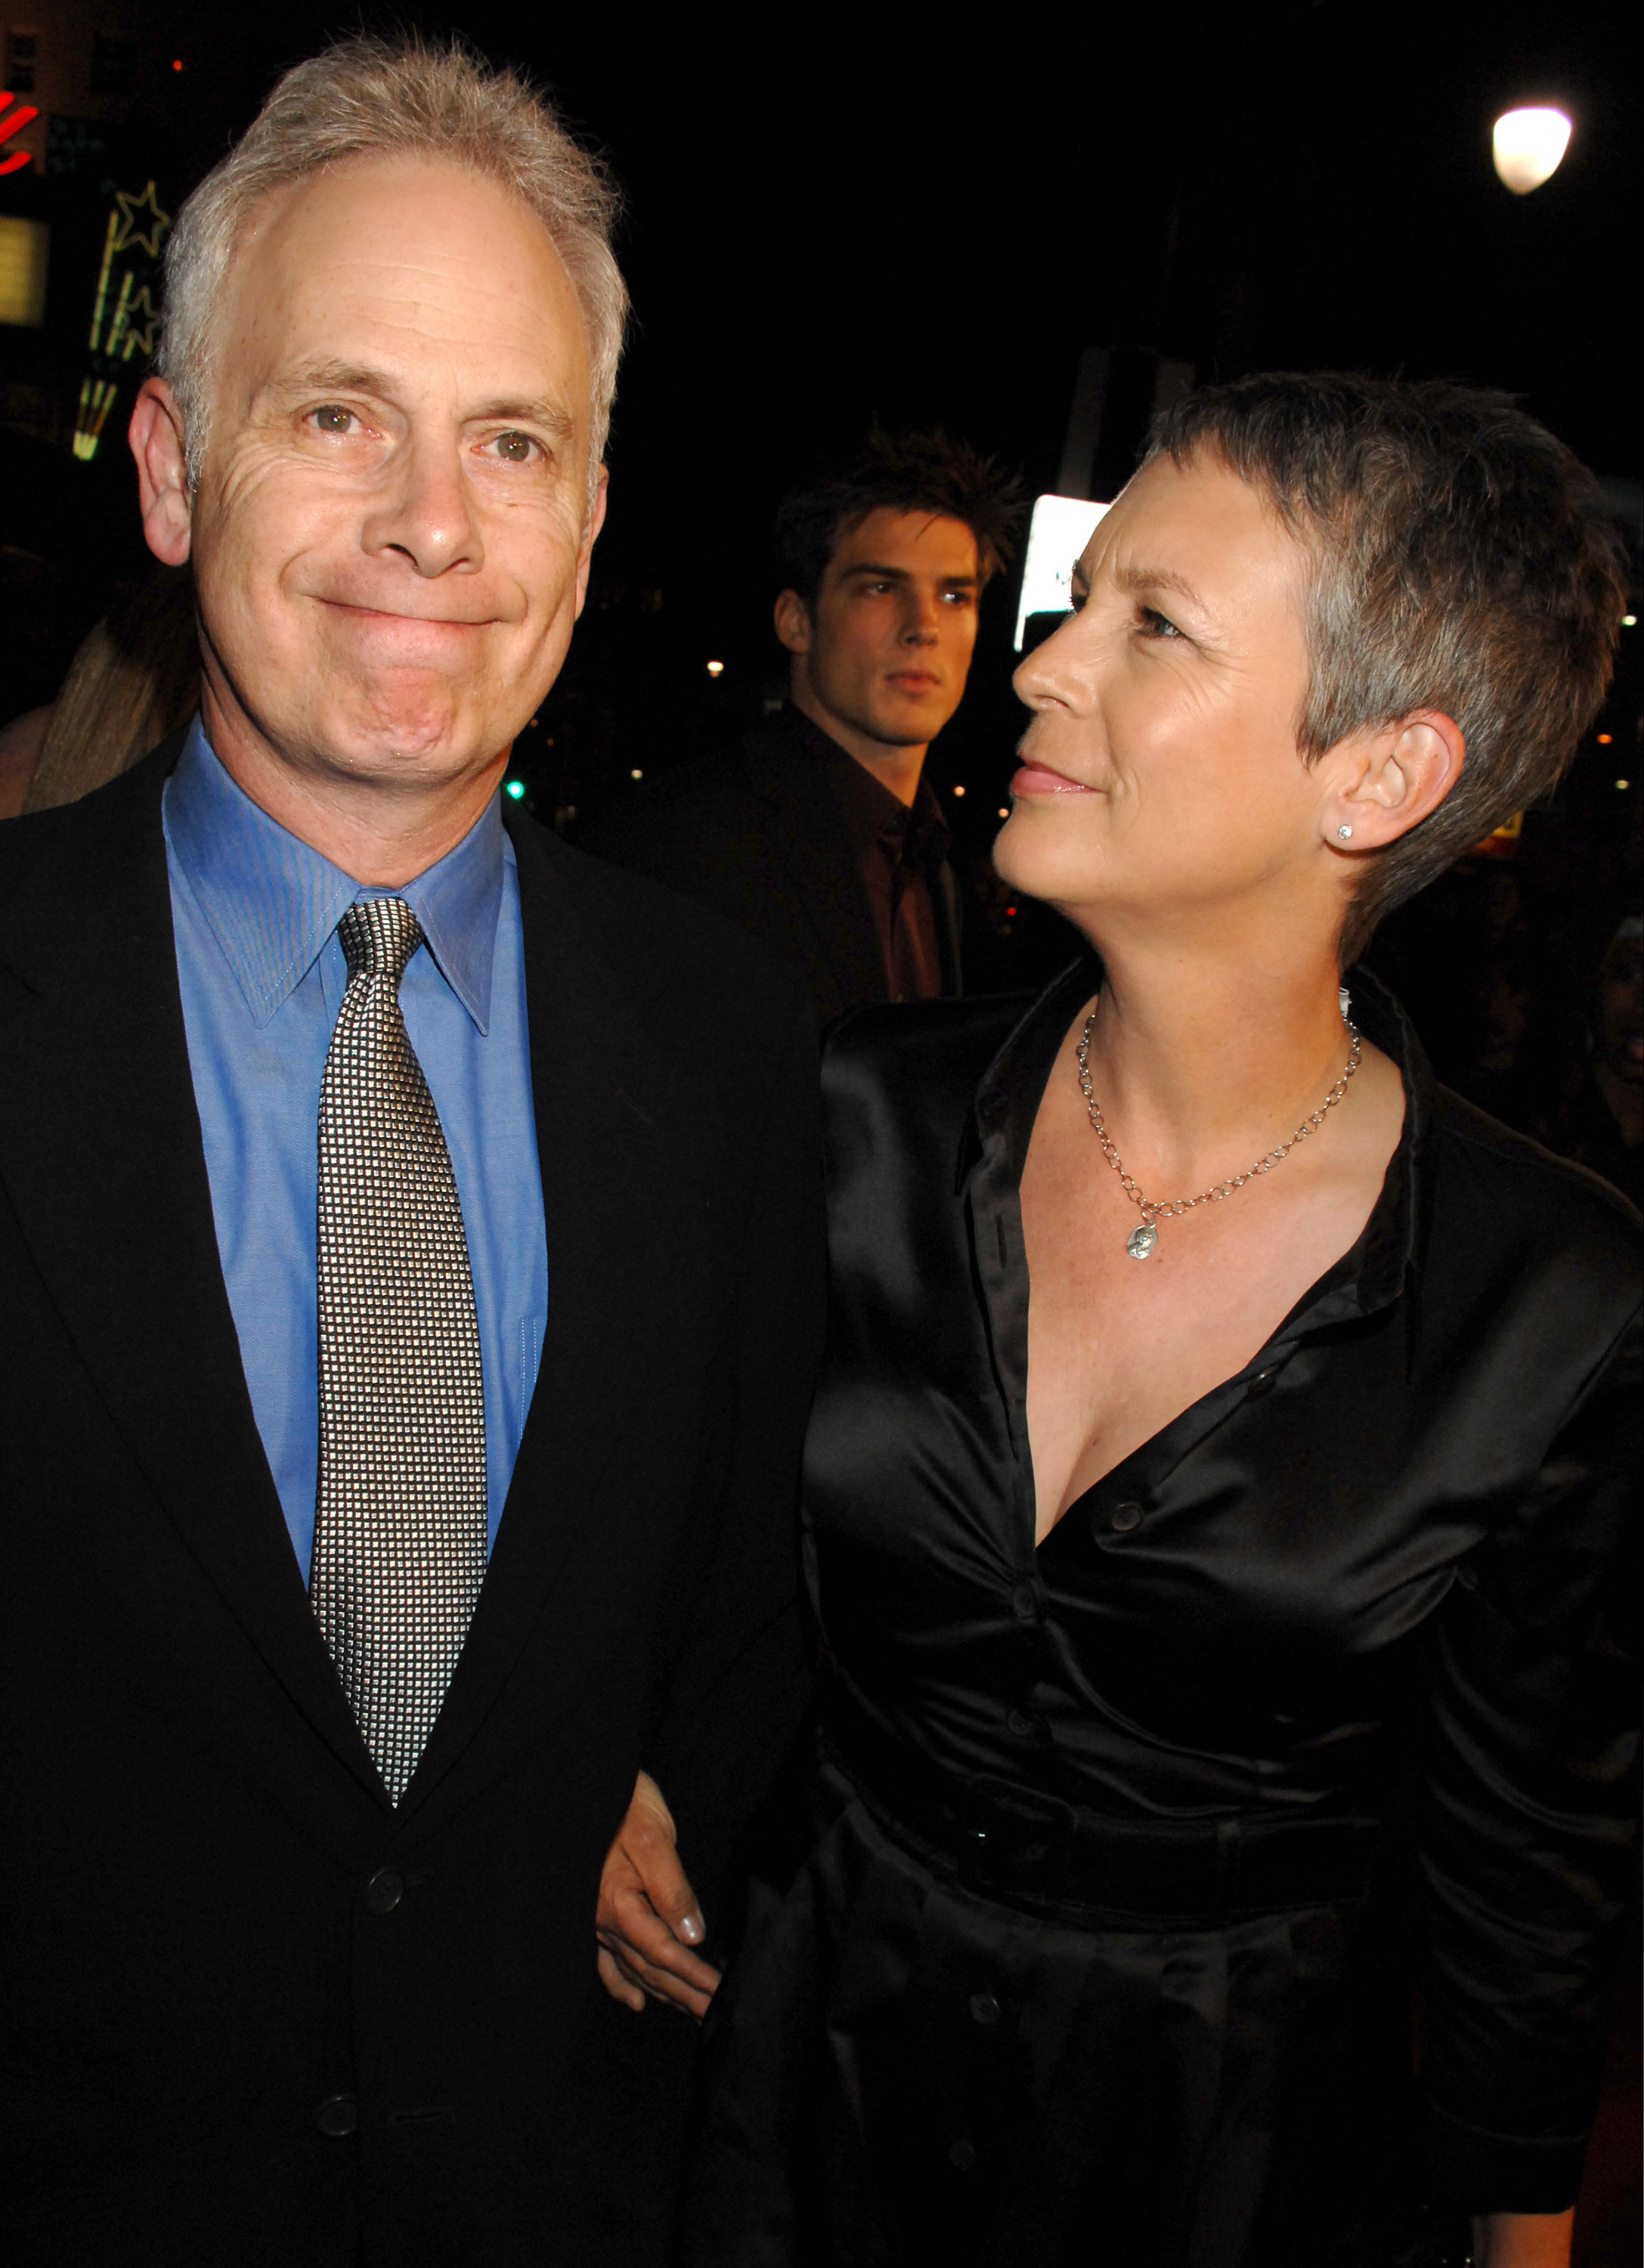 Christopher Guest and Jamie Lee Curtis during "Music and Lyrics" Los Angeles Premiere - Red Carpet at Grauman's Chinese Theater on February 7, 2007 in Hollywood, California | Source: Getty Images